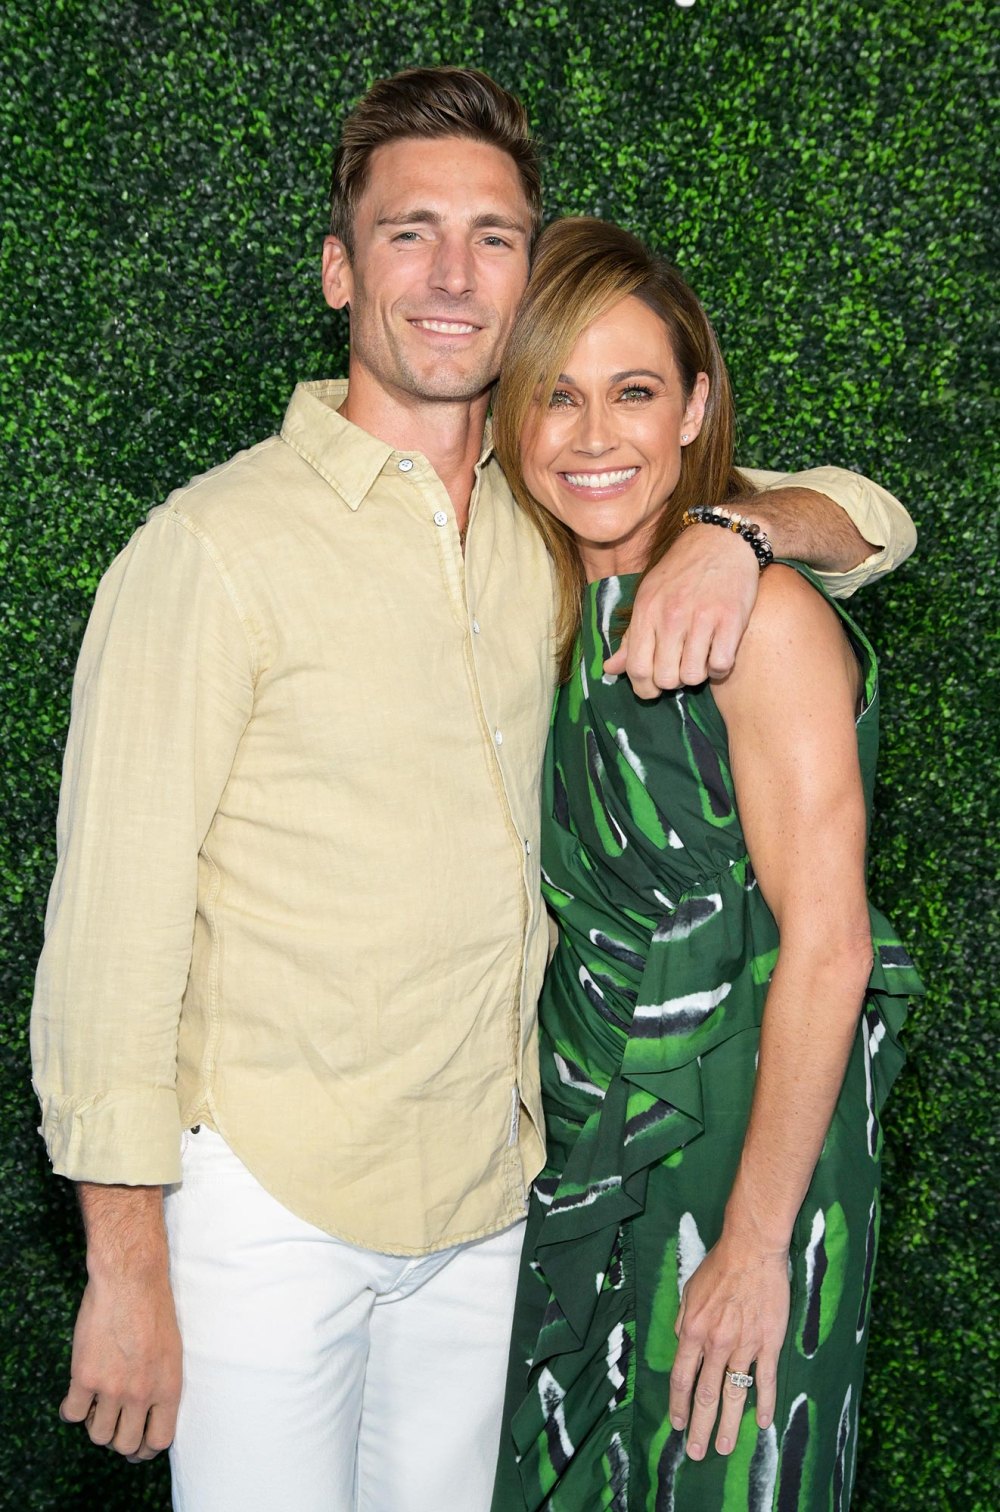 Nikki DeLoach Has Her Heart Set on Making a New Holiday Hallmark Movie With Andrew Walker